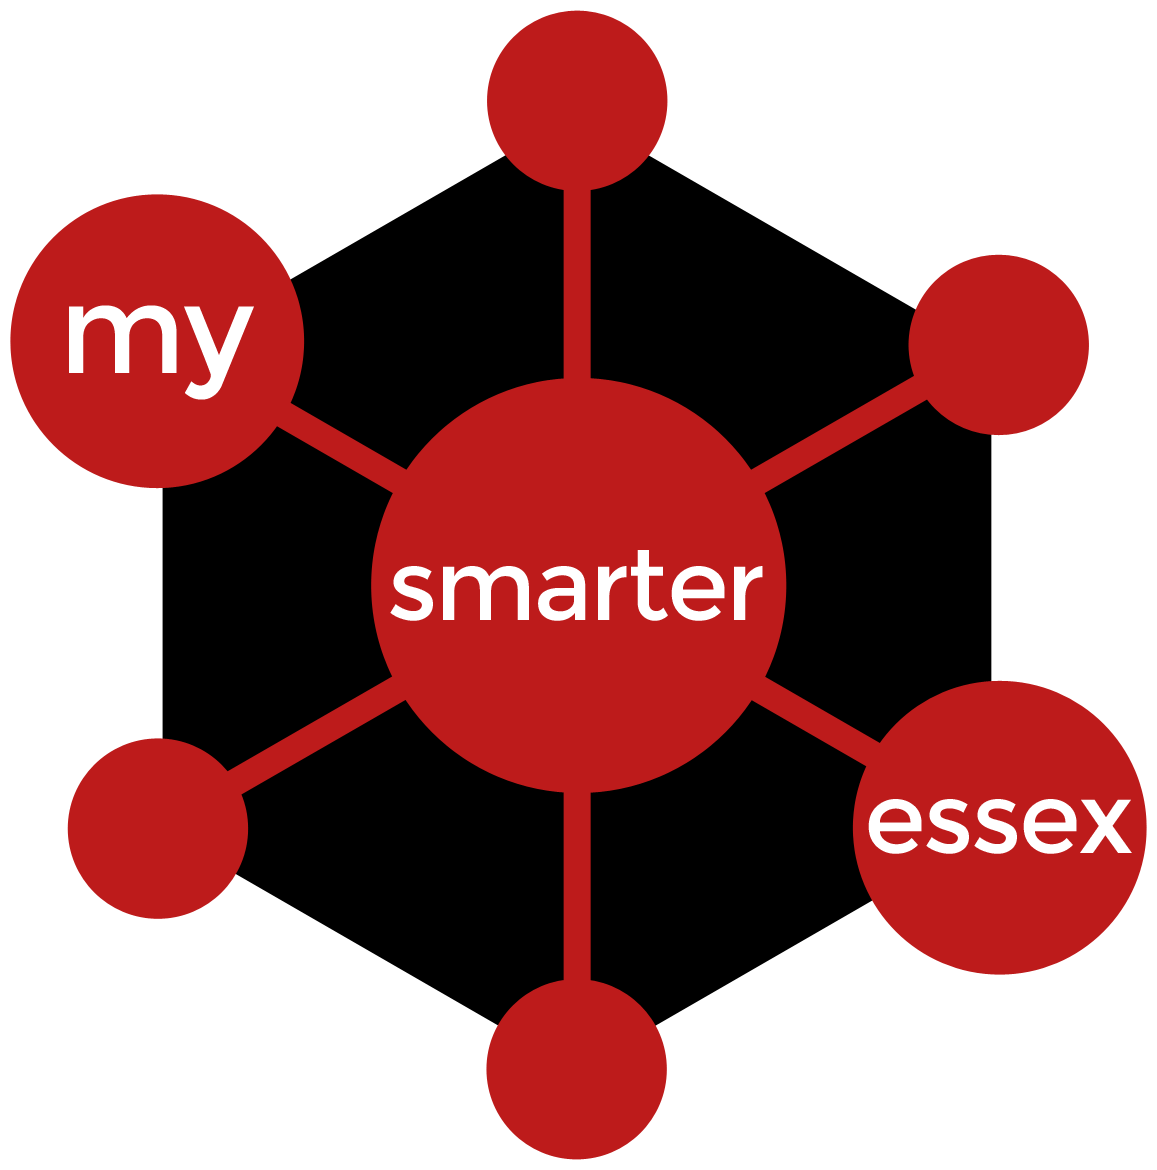 my_smarter_essex_red_hex.png